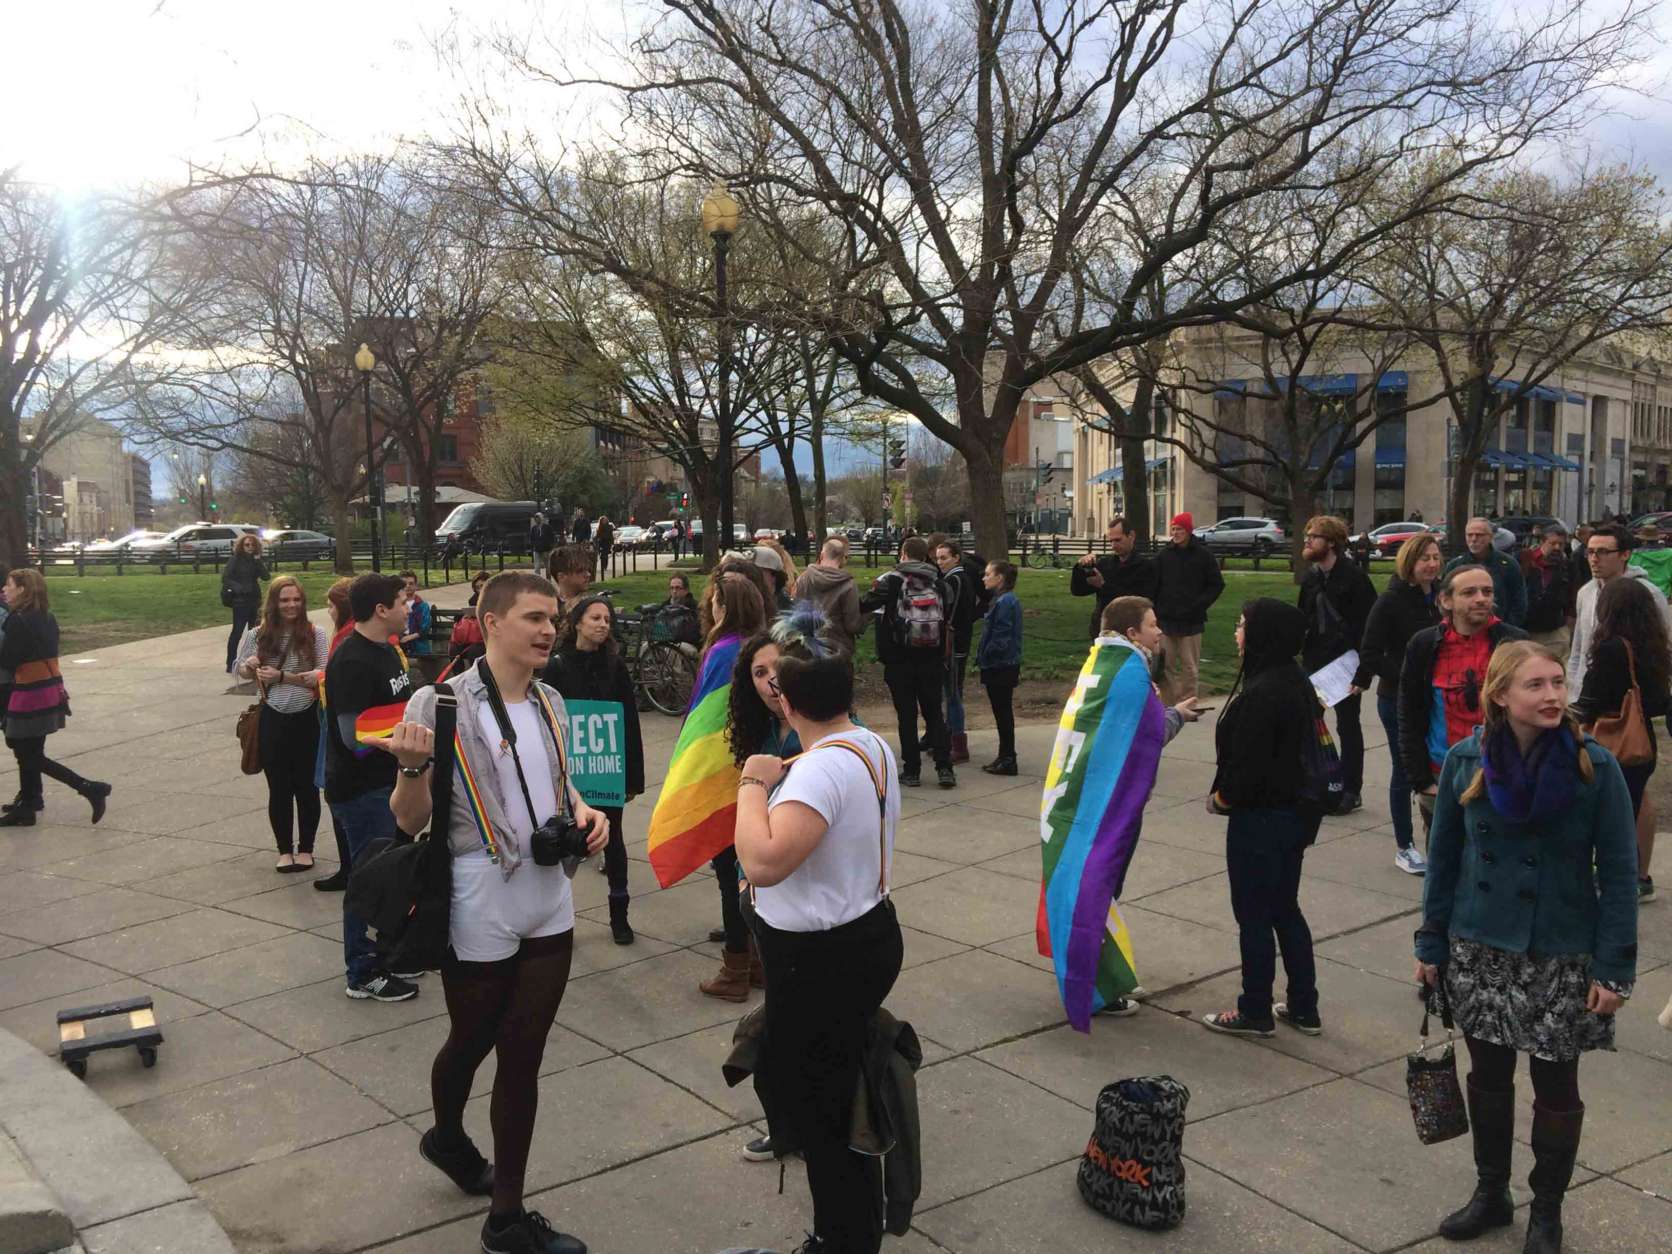 The protest -- The Queer Dance Party for Climate Justice, as one of the organizers called it, is in response to the Trump administration’s executive order for the Environmental Protection Agency to roll back the Obama administration’s climate regulations. (WTOP/Dick Uliano)